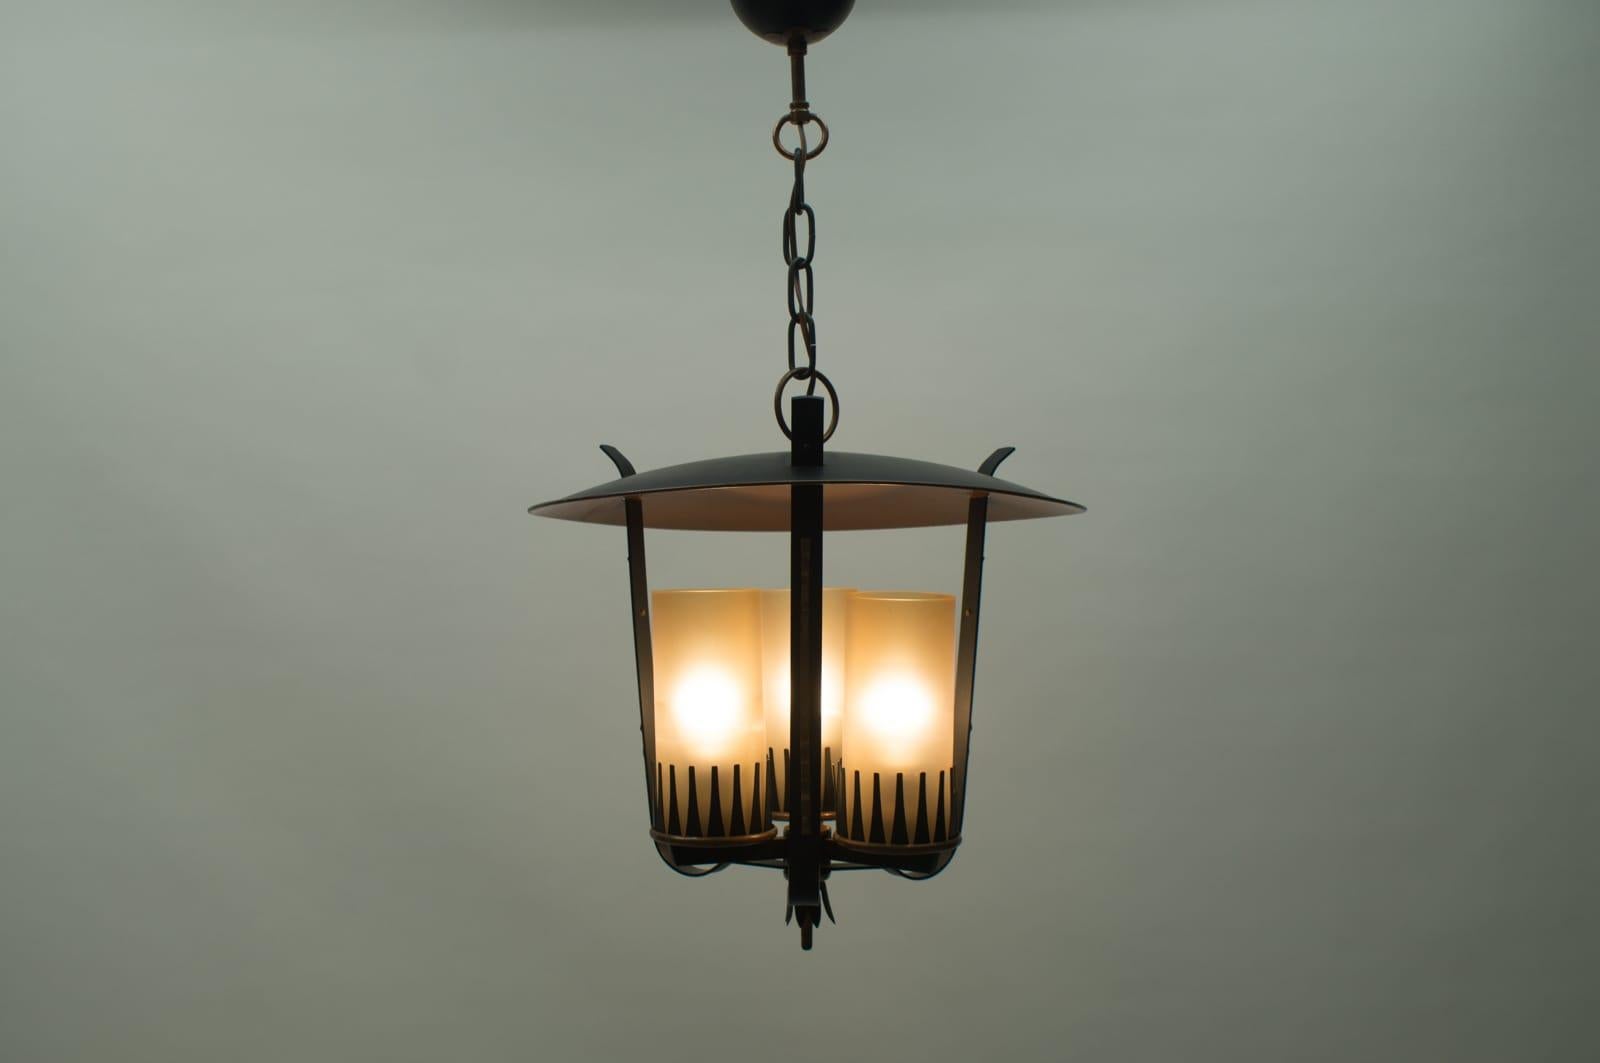 Executed in enameled metal, copper and satinized glass, it comes with 3 x E27 Edison screw fit bulb holders, is wired, and in working condition. It runs both on 110/230 Volt.